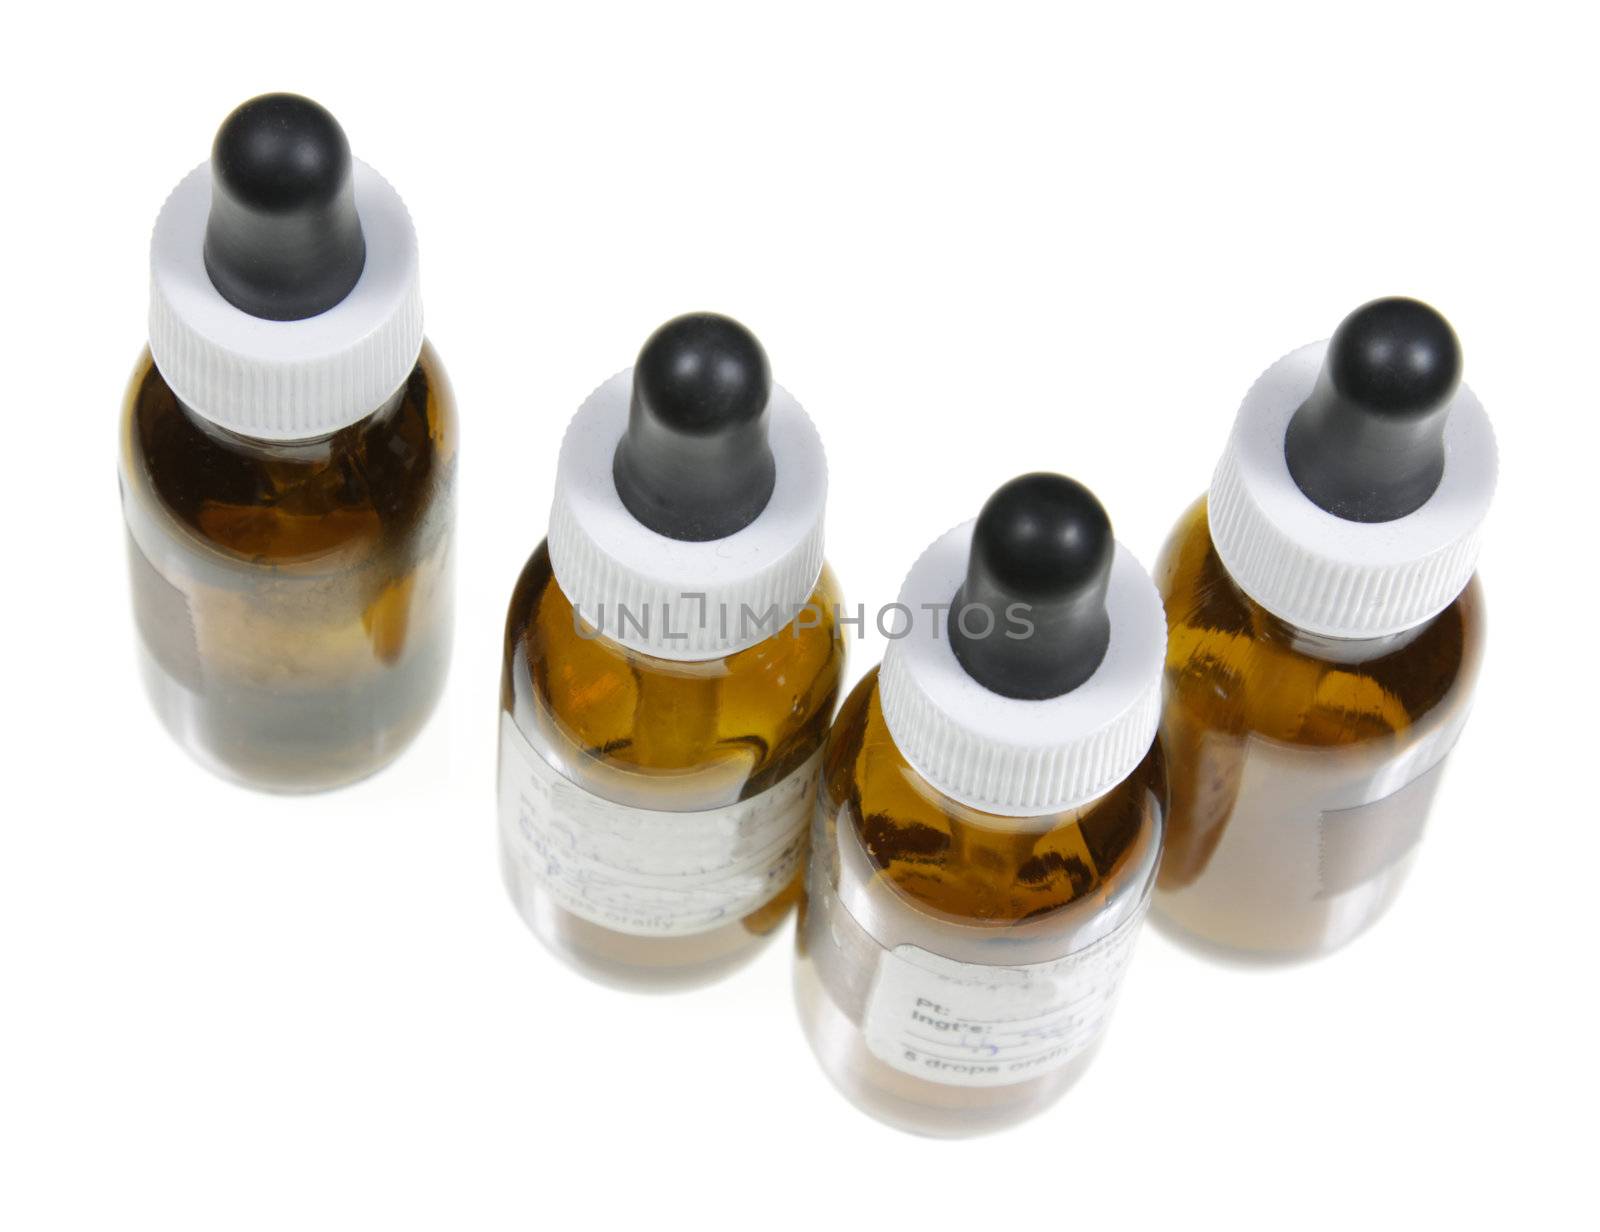 Four dropper bottles with naturopathic medicine in them.